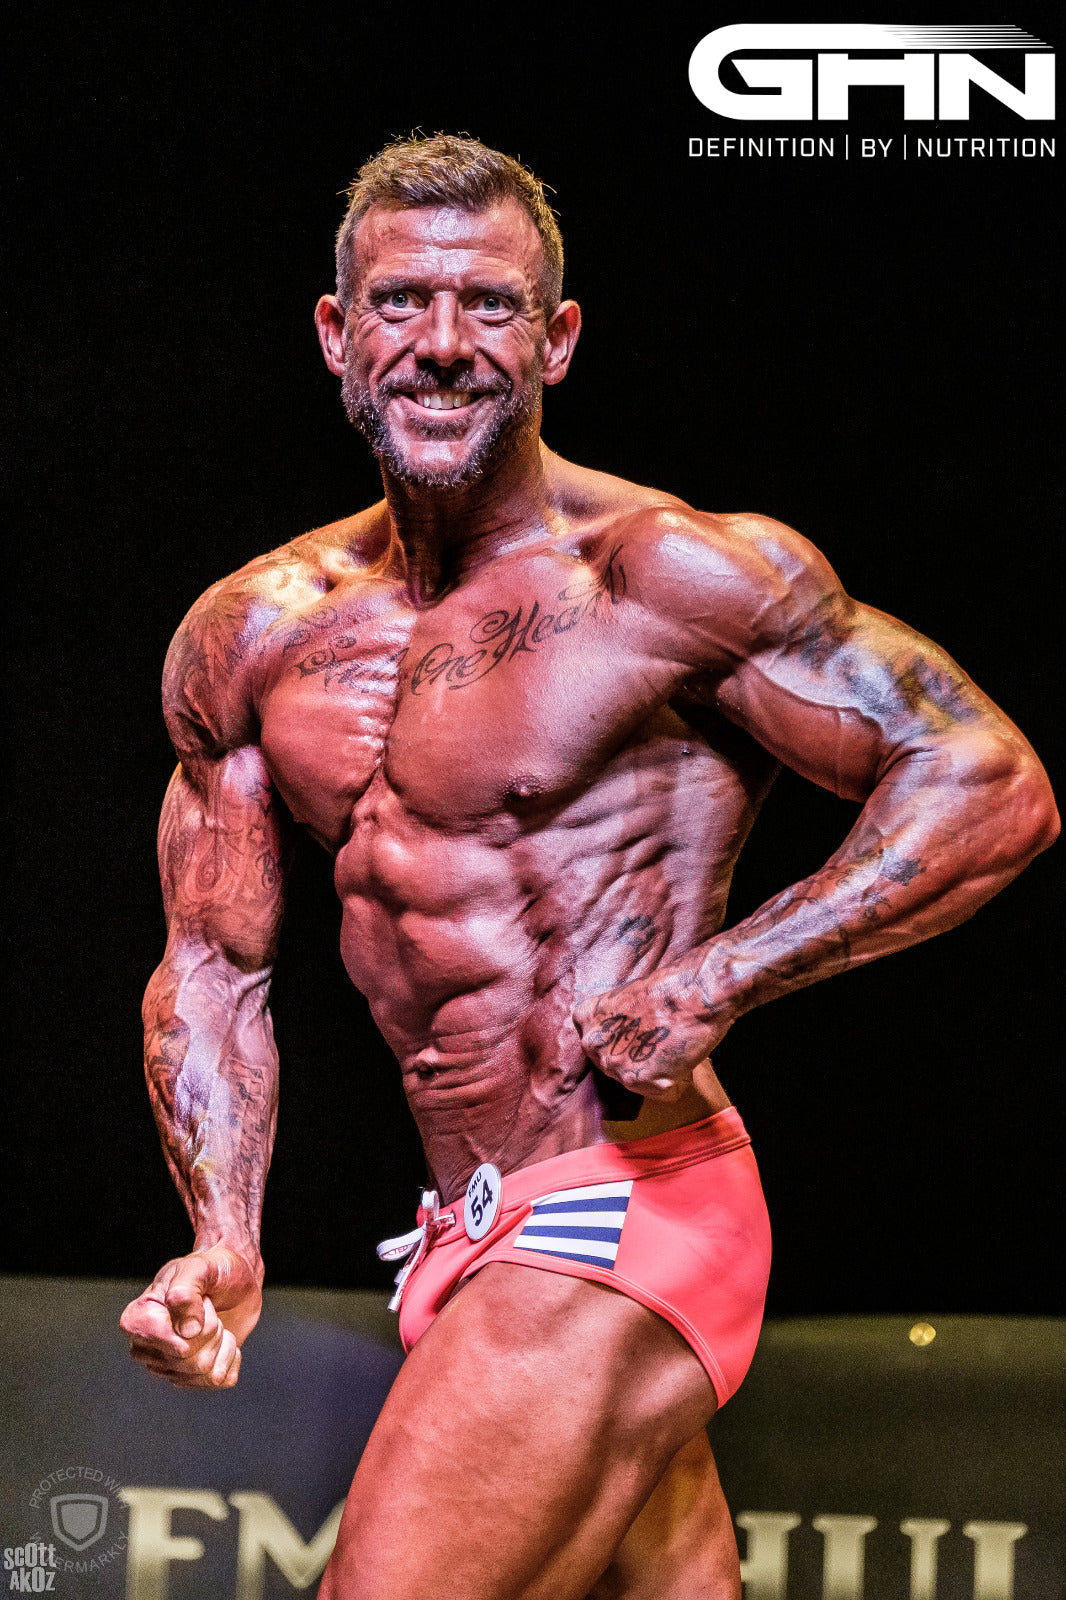 Paul Remmer Wins At Future Muscle Union